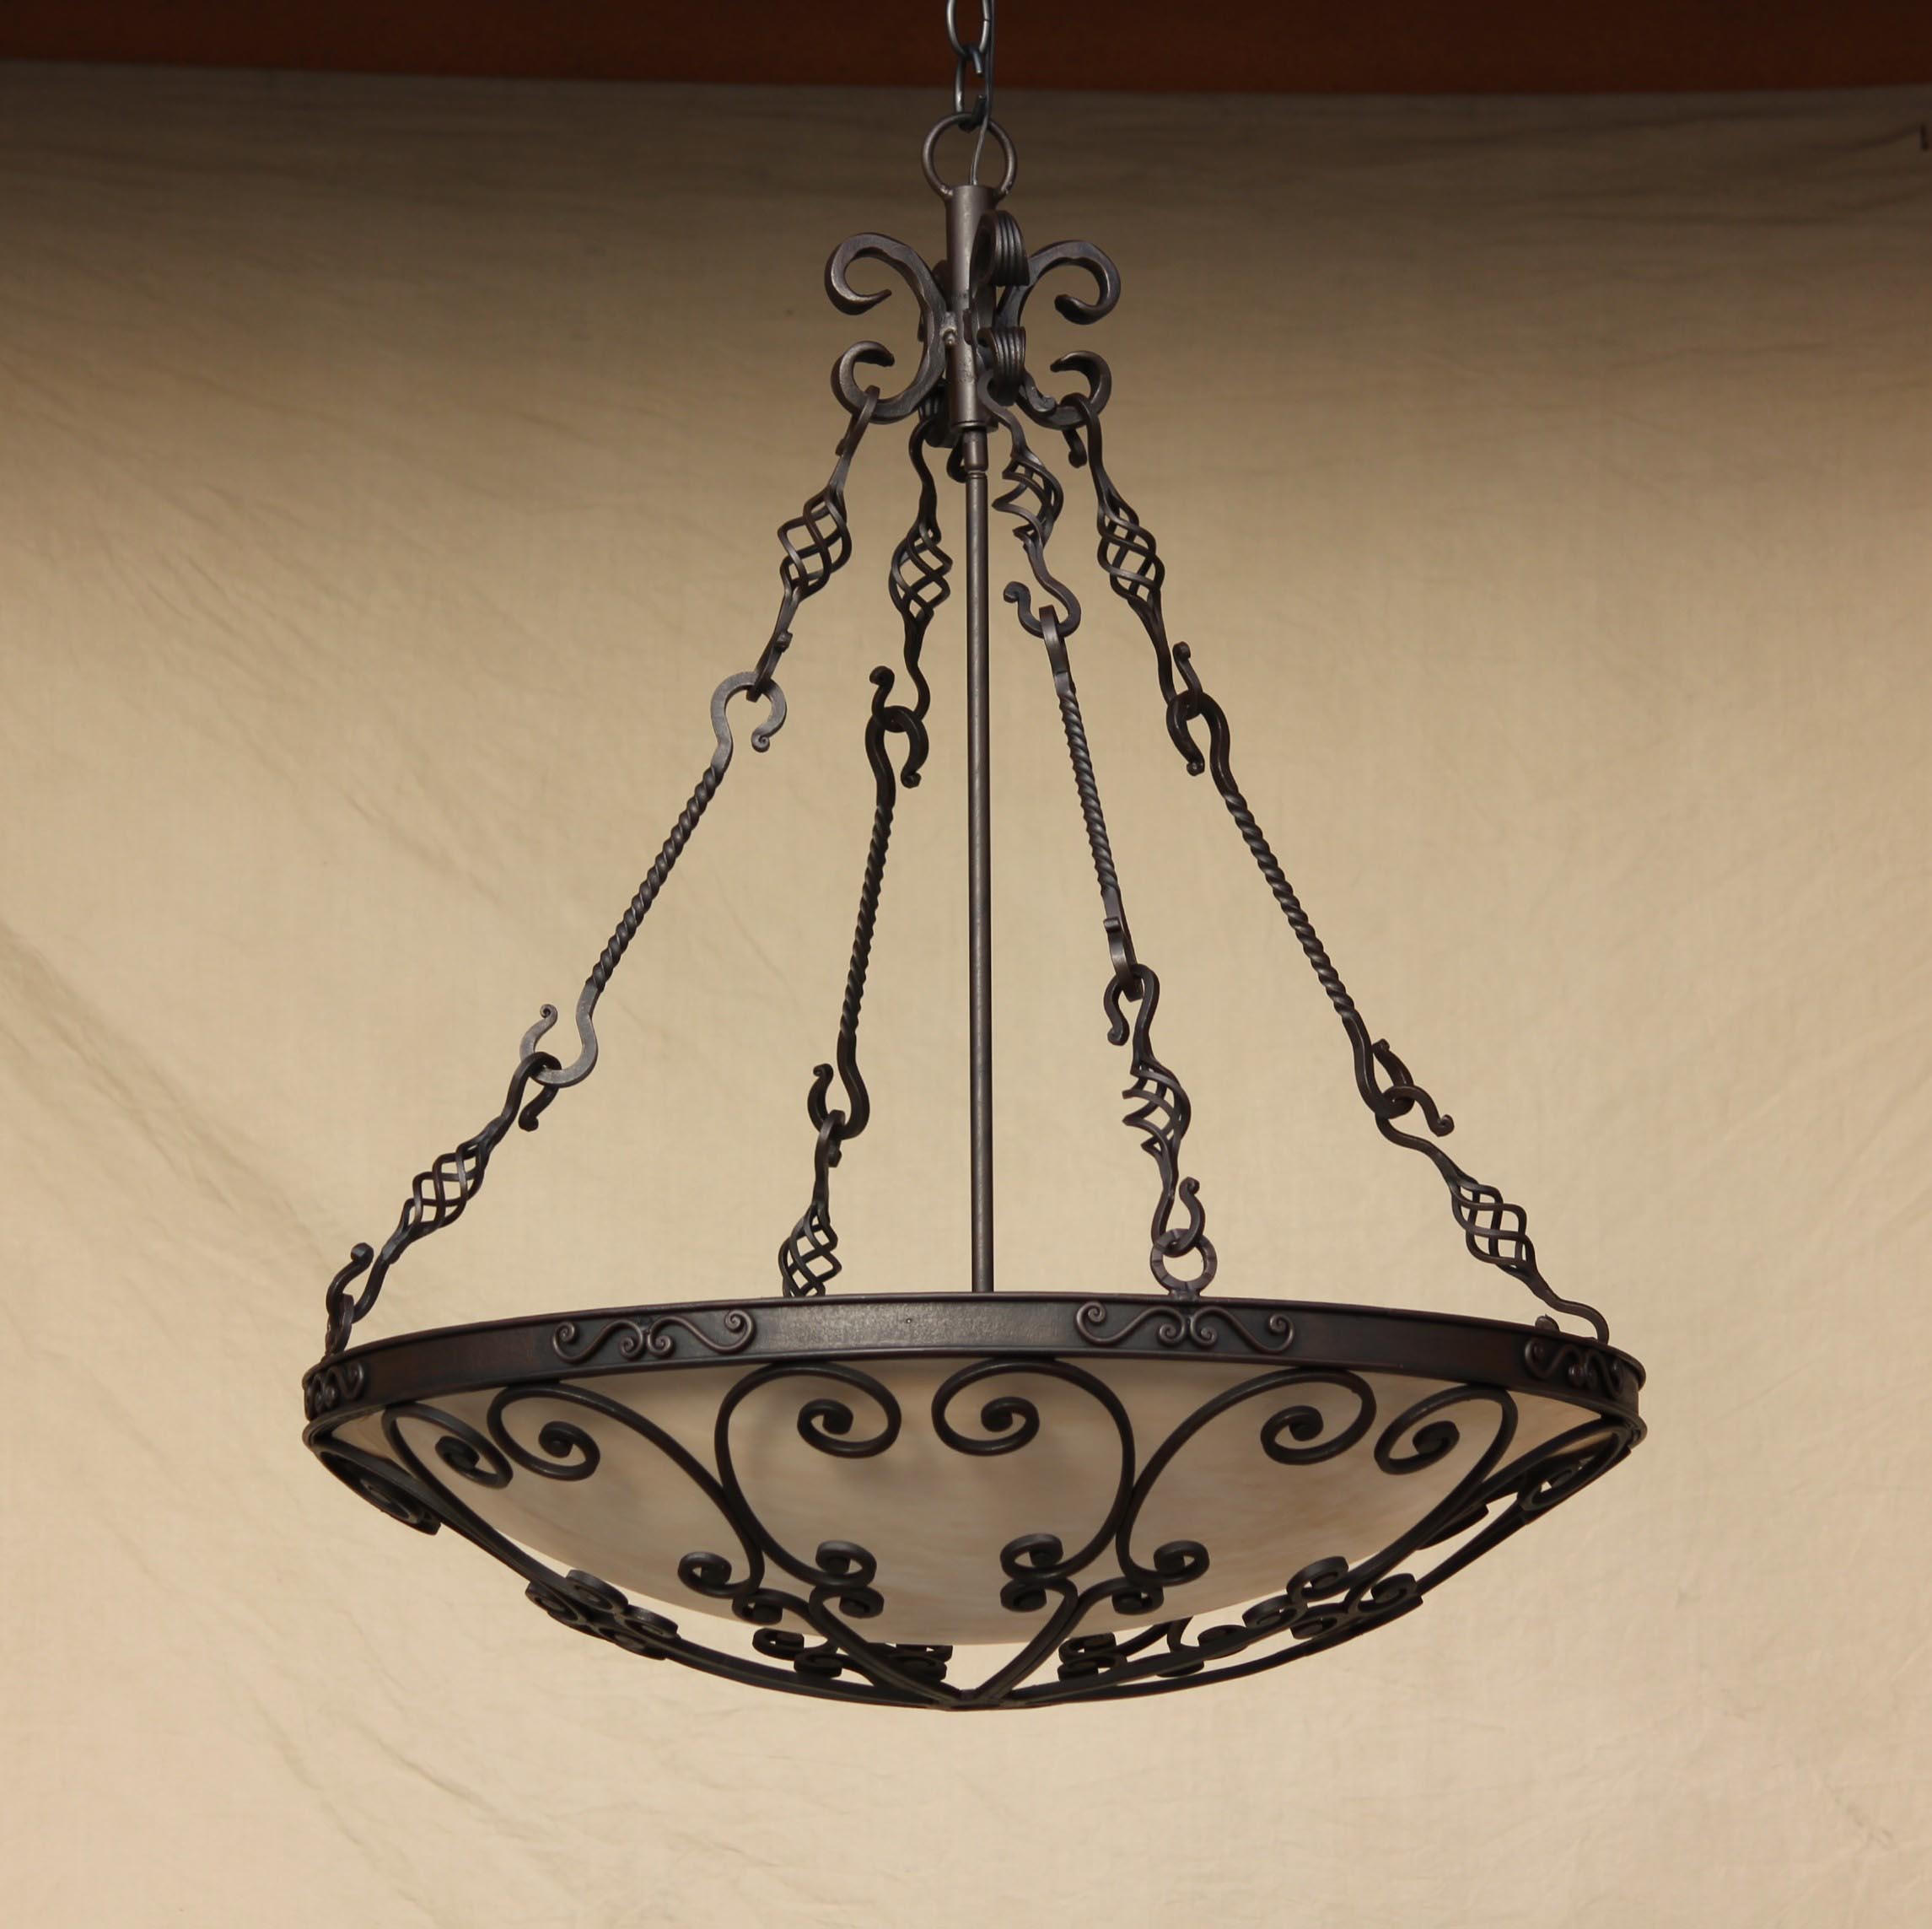 Forged Iron Lighting Fixtures